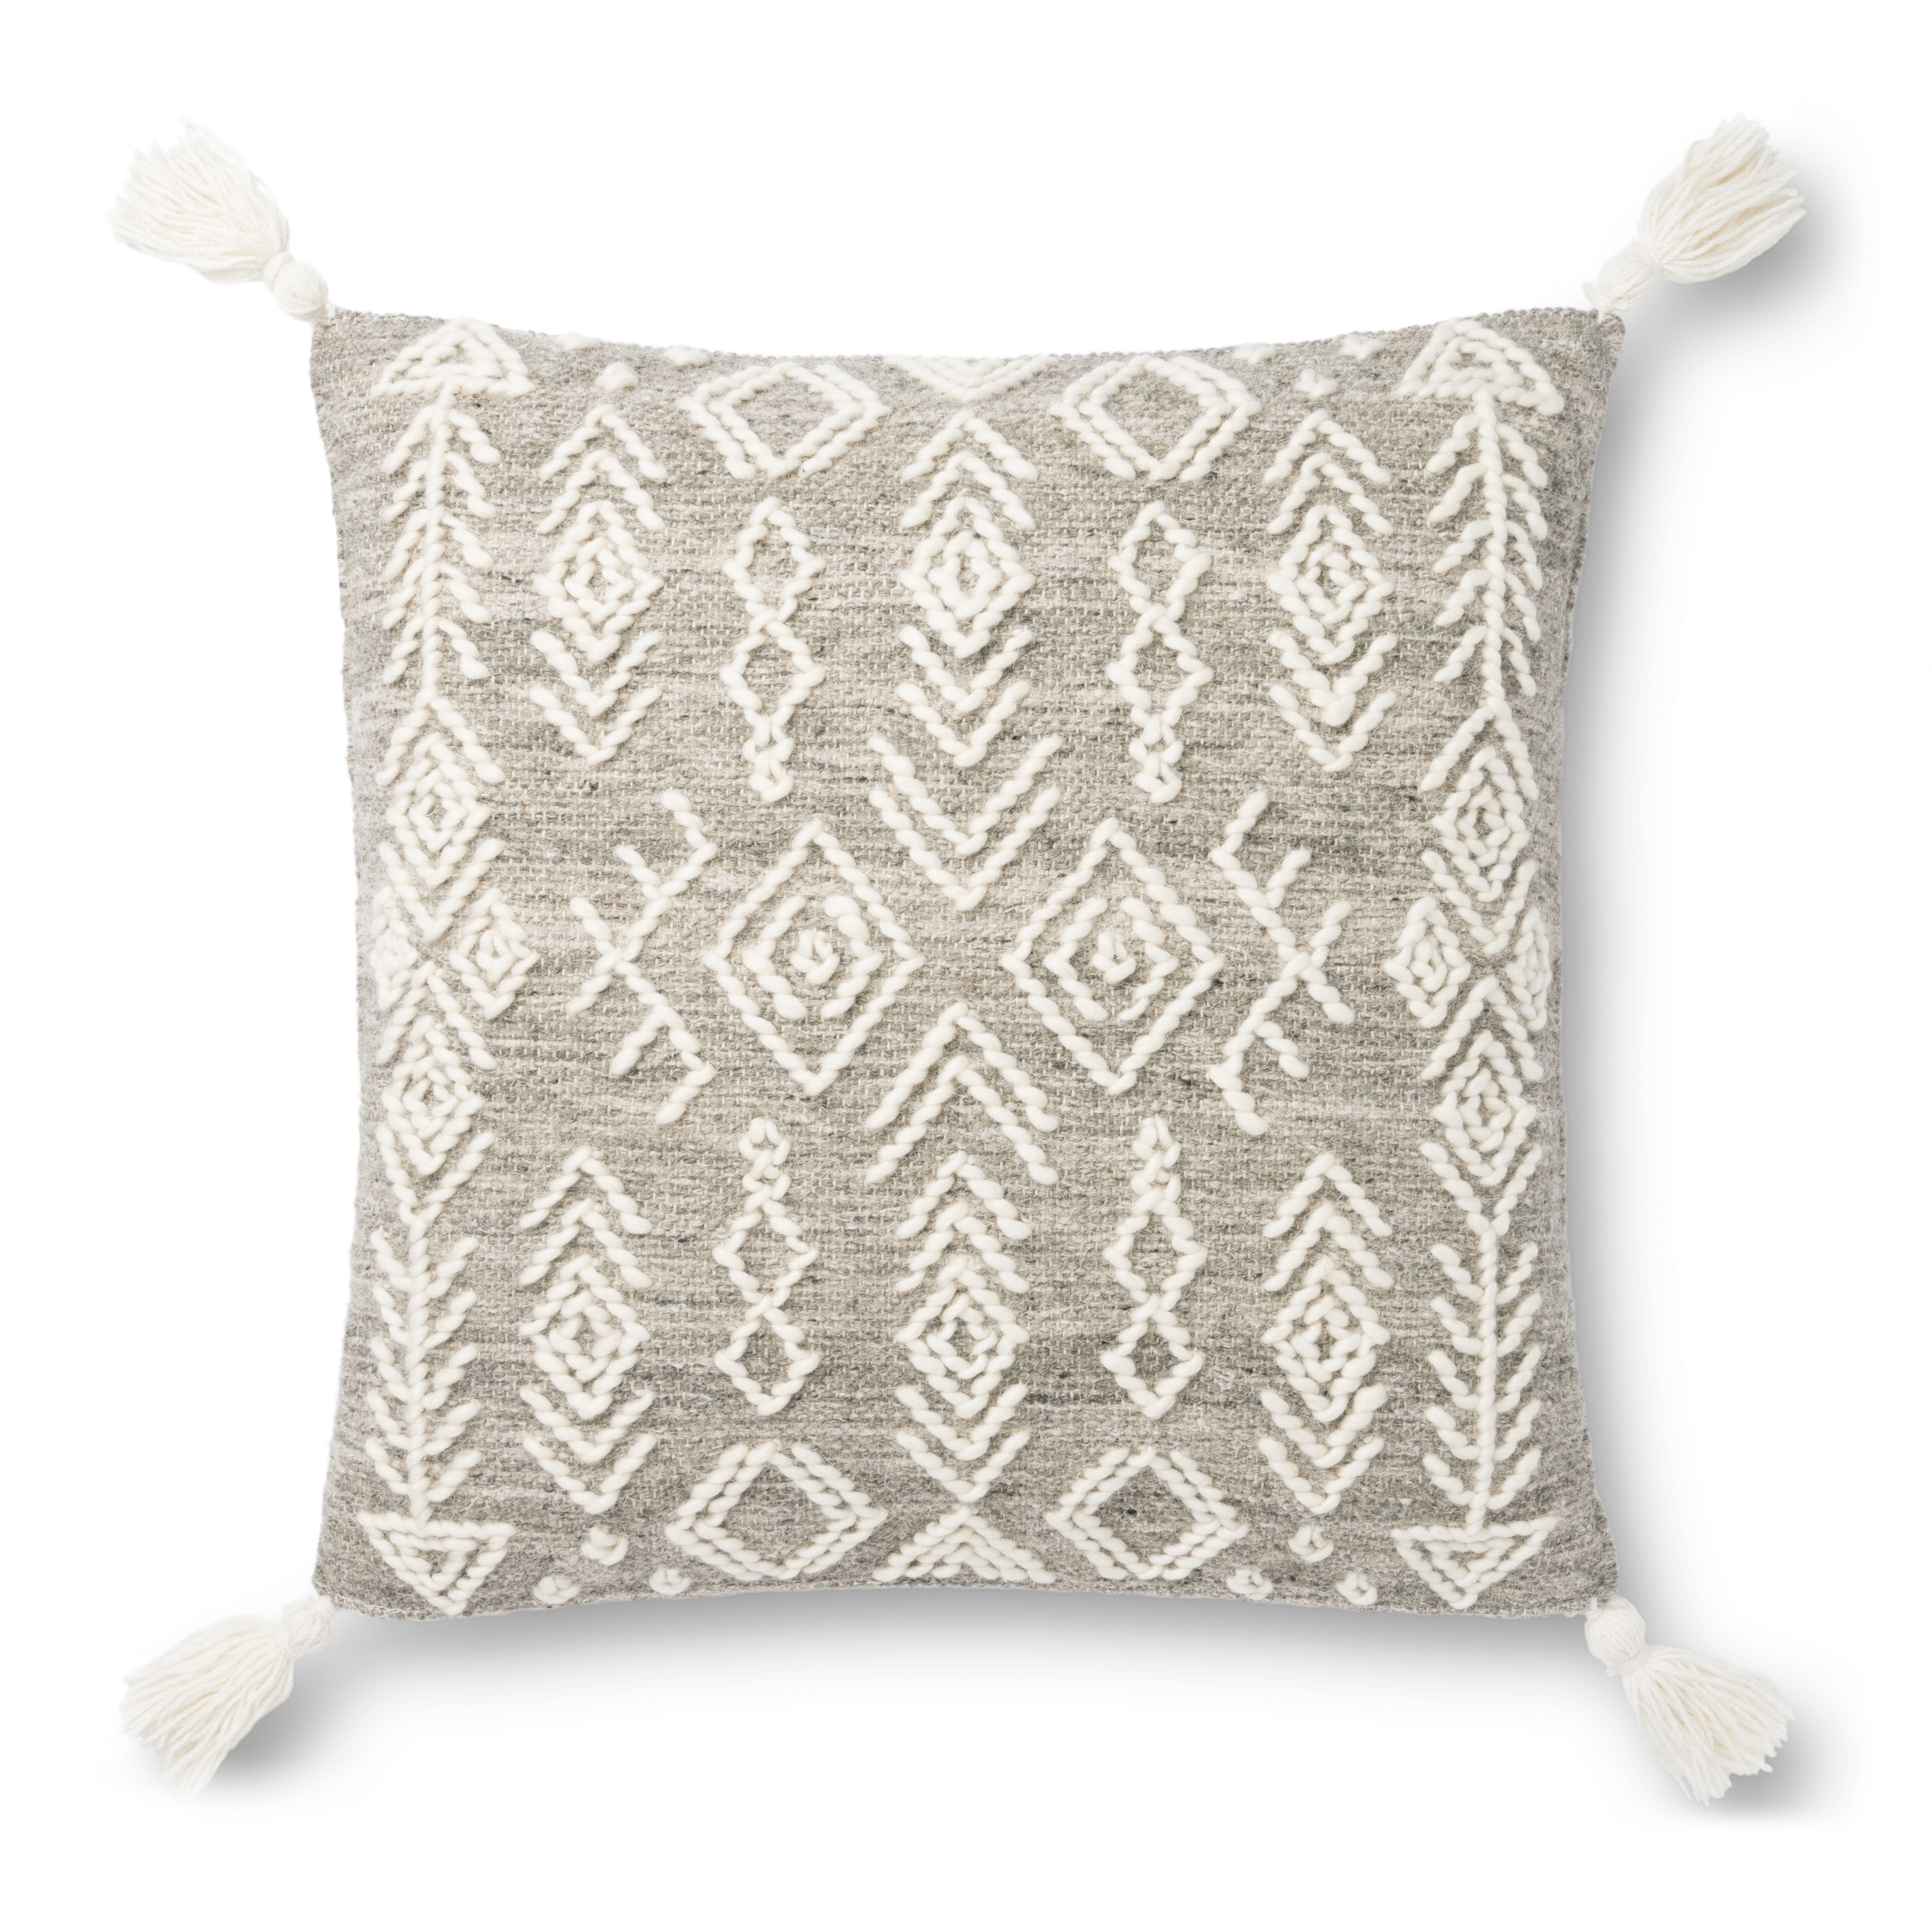 Justina Blakeney x Loloi PILLOWS P0840 Grey / Ivory 22" x 22" Cover Only - Image 0